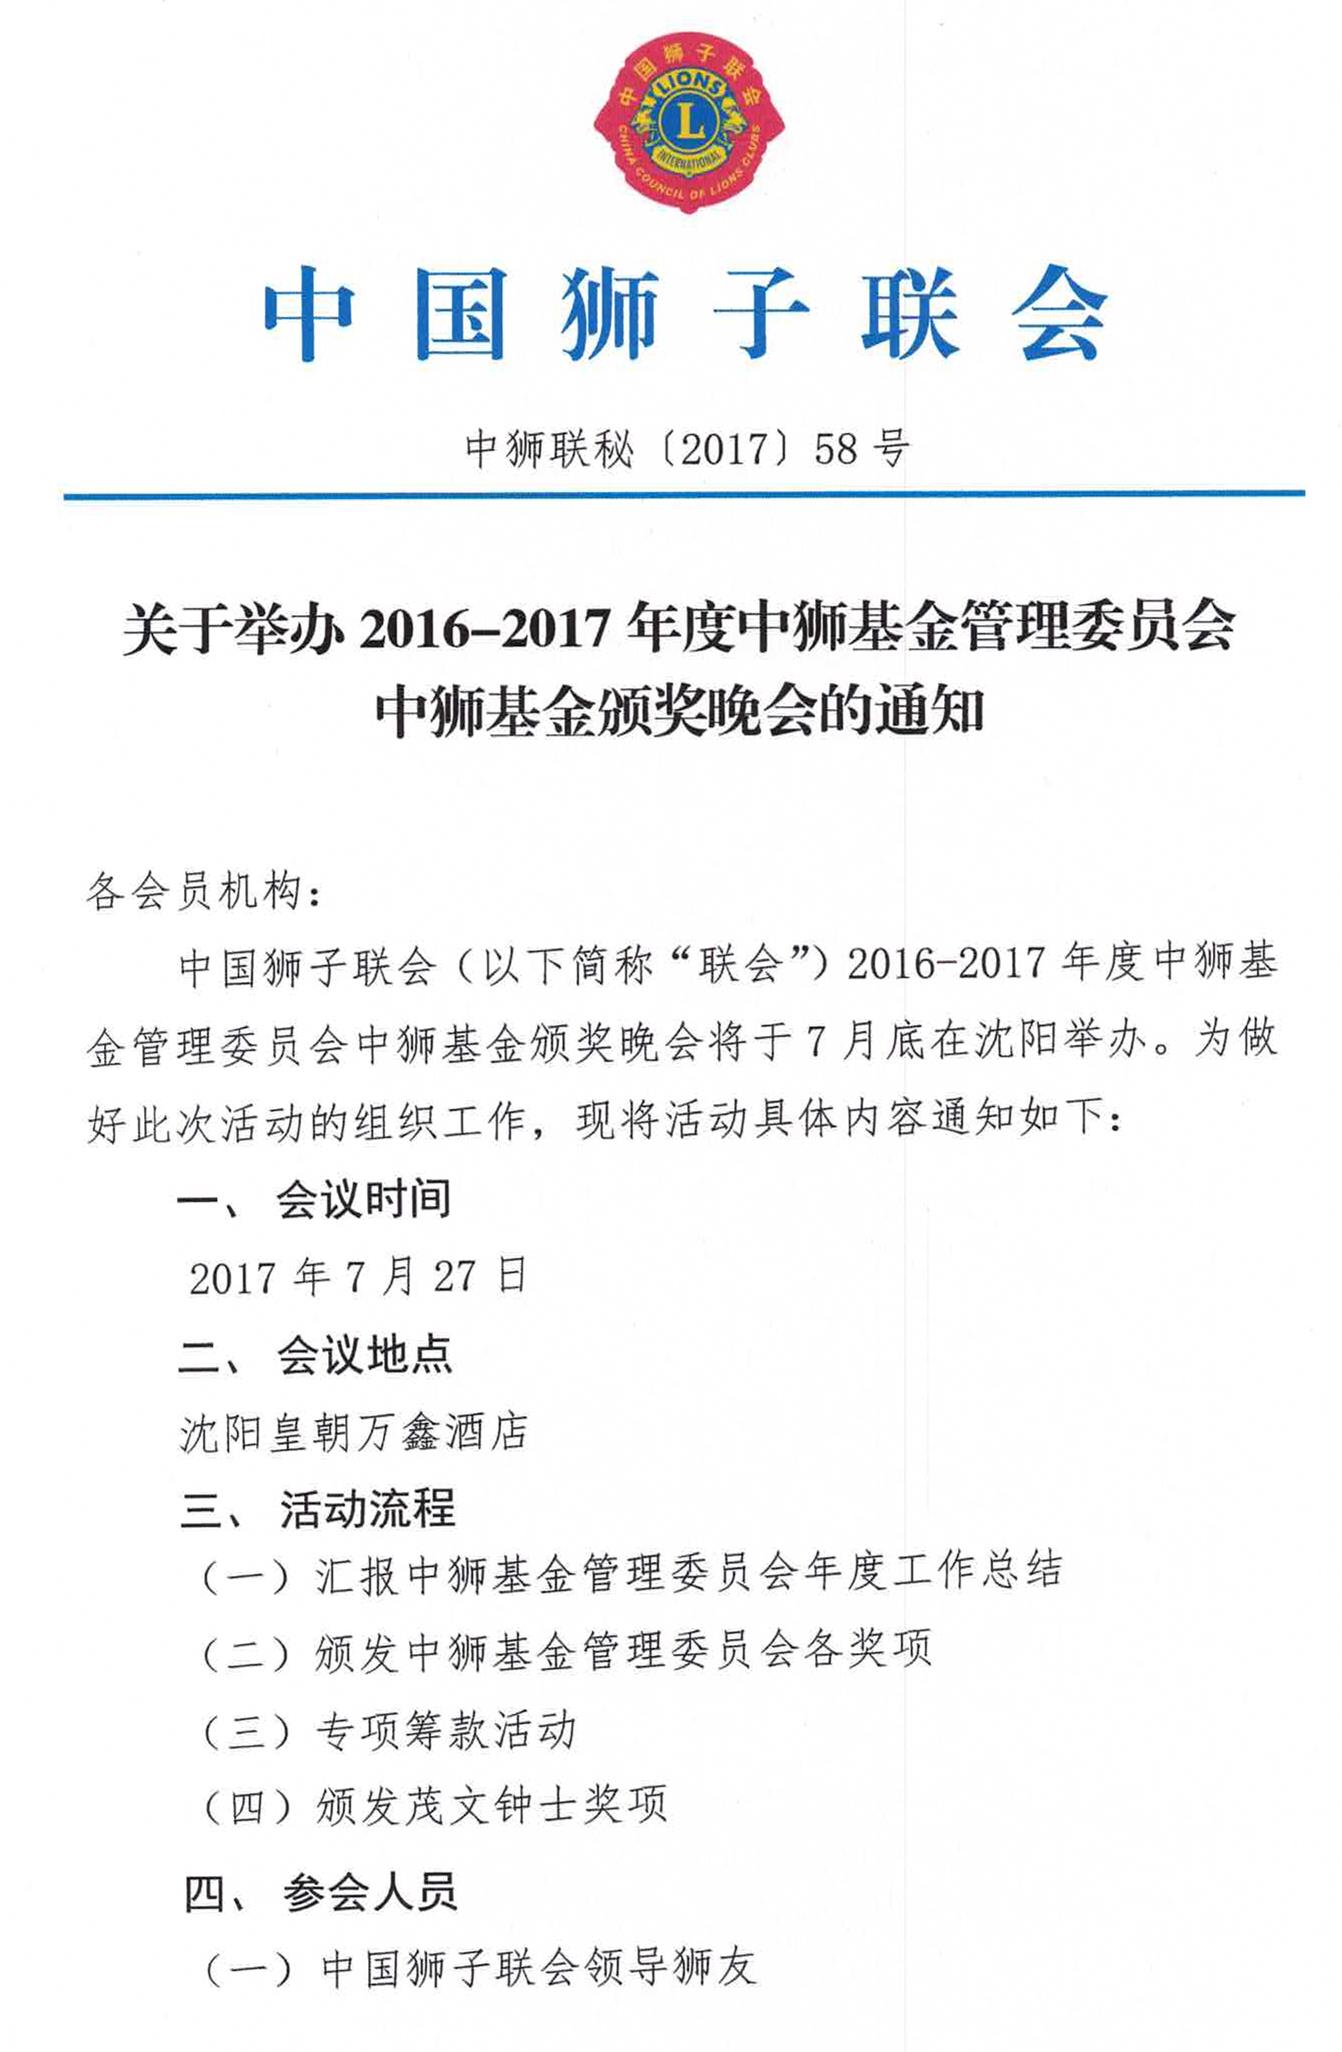 Forward | about 2016-2017 in the lion fund fund management committee of the party's notice news 图1张